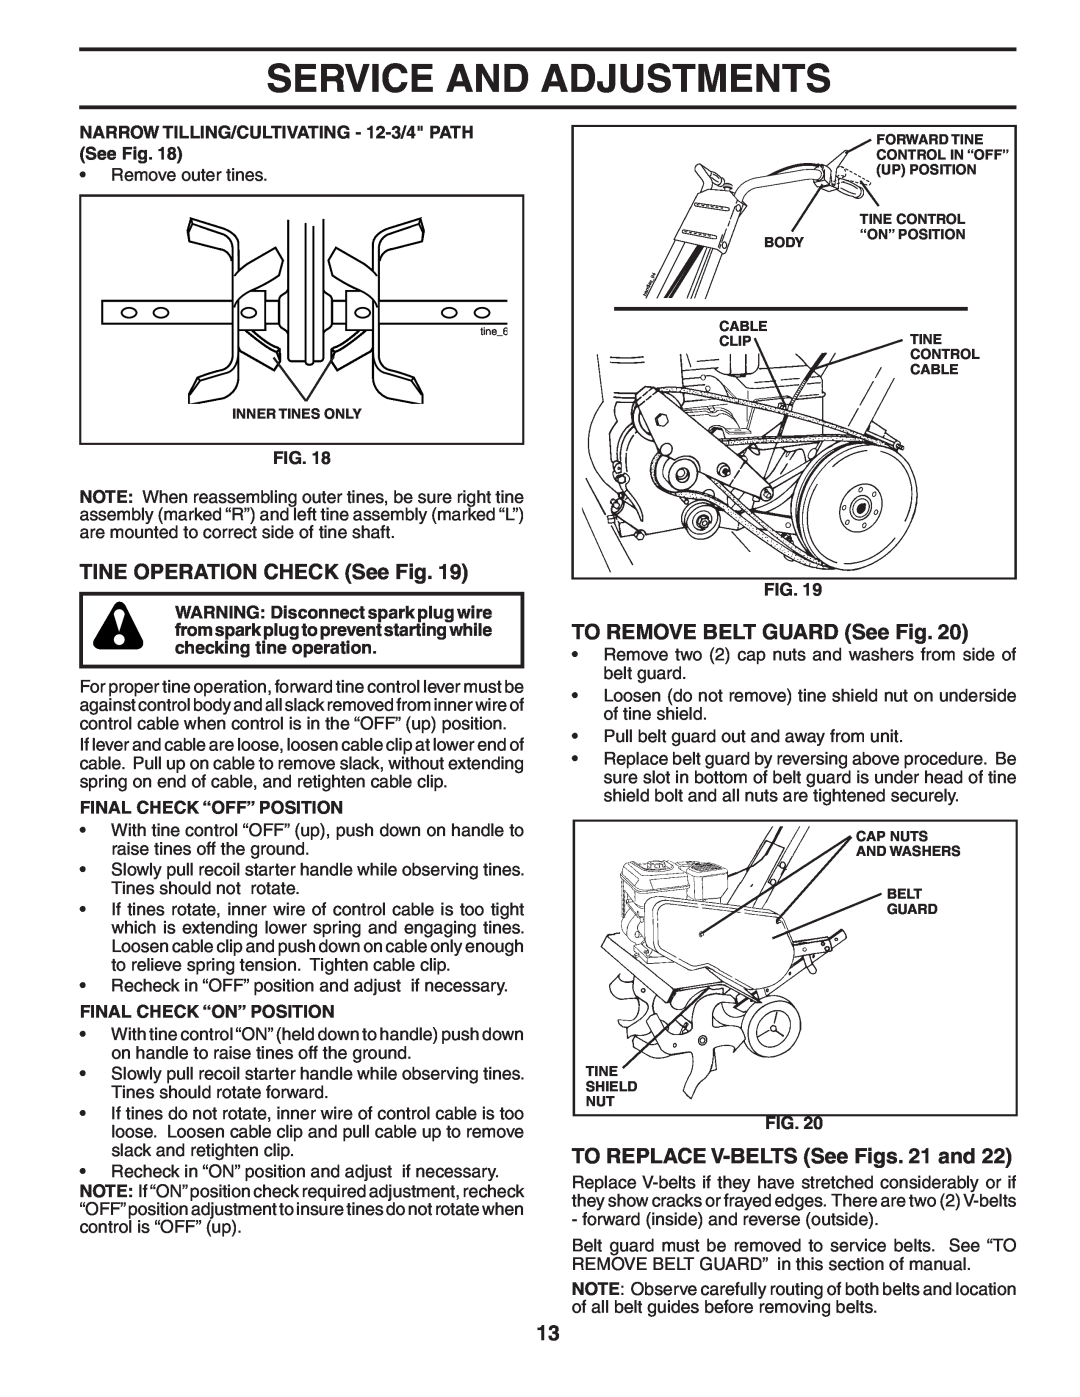 Poulan HDF550 manual TINE OPERATION CHECK See Fig, TO REMOVE BELT GUARD See Fig, TO REPLACE V-BELTSSee Figs. 21 and 